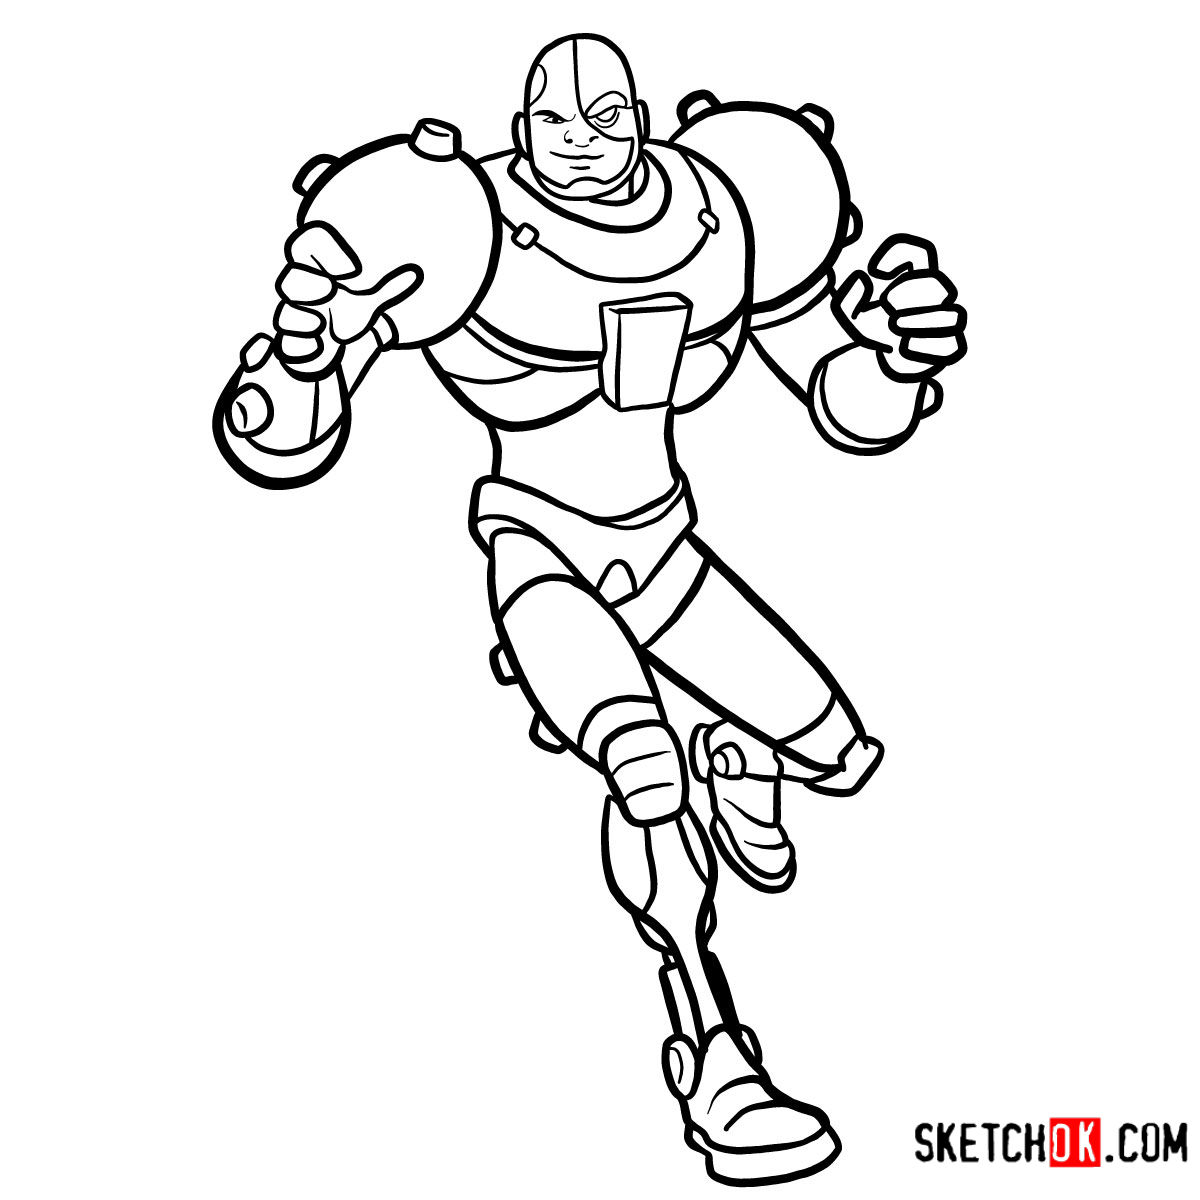 How to draw Cyborg | Teen Titans